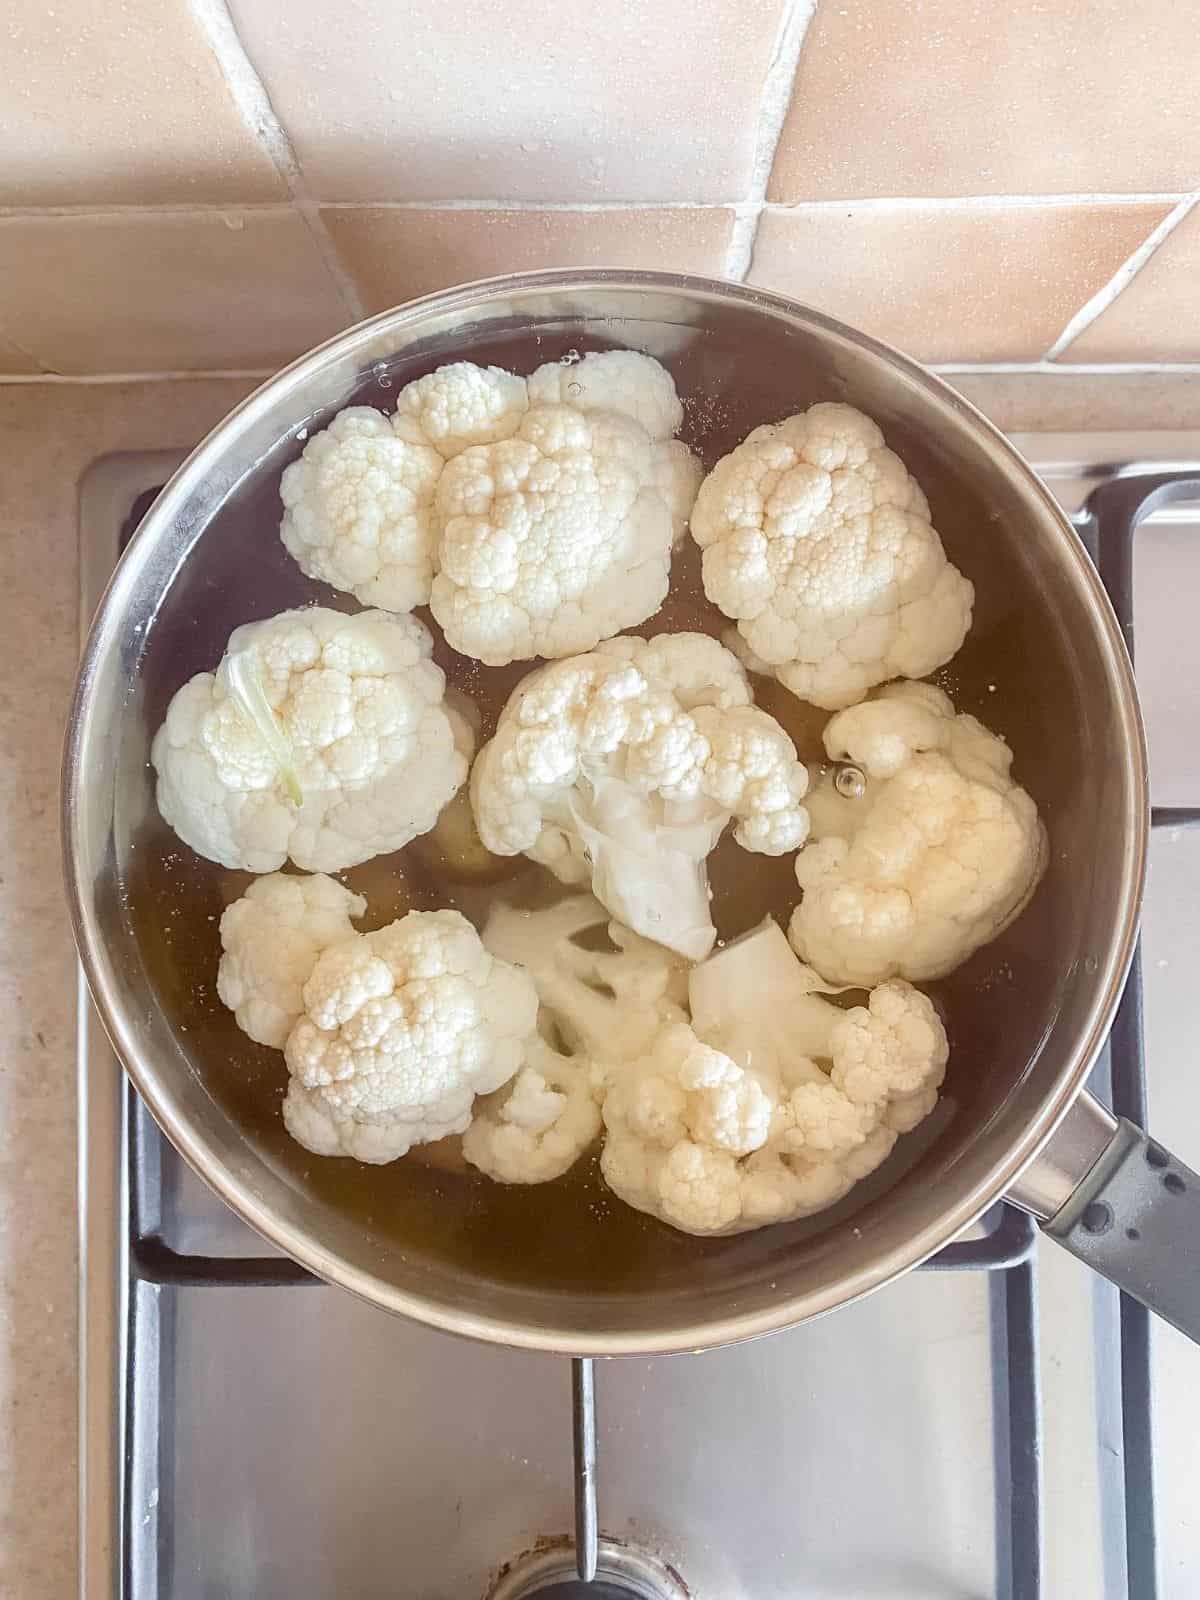 cauliflower florets and potatoes in a pan of water.